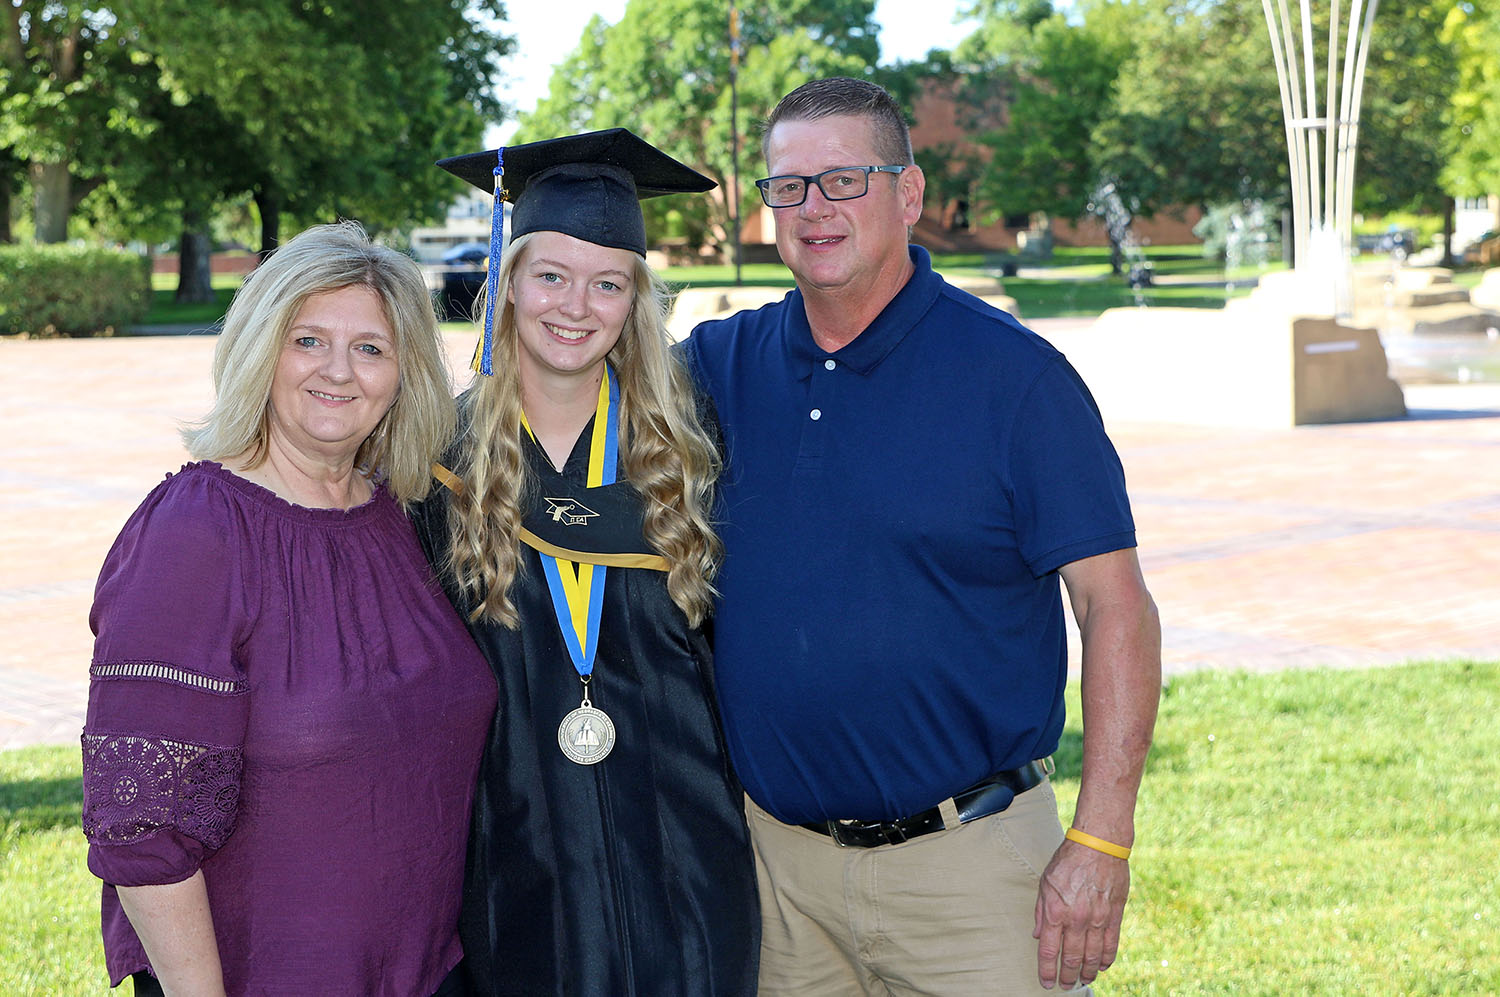 UNK graduate Madison Clausen of Norfolk poses for a photo with her parents Penny and Mark before Friday’s commencement ceremony. Clausen earned a bachelor’s degree in communication disorders and she’ll pursue a master’s in speech-language pathology at UNK this fall.